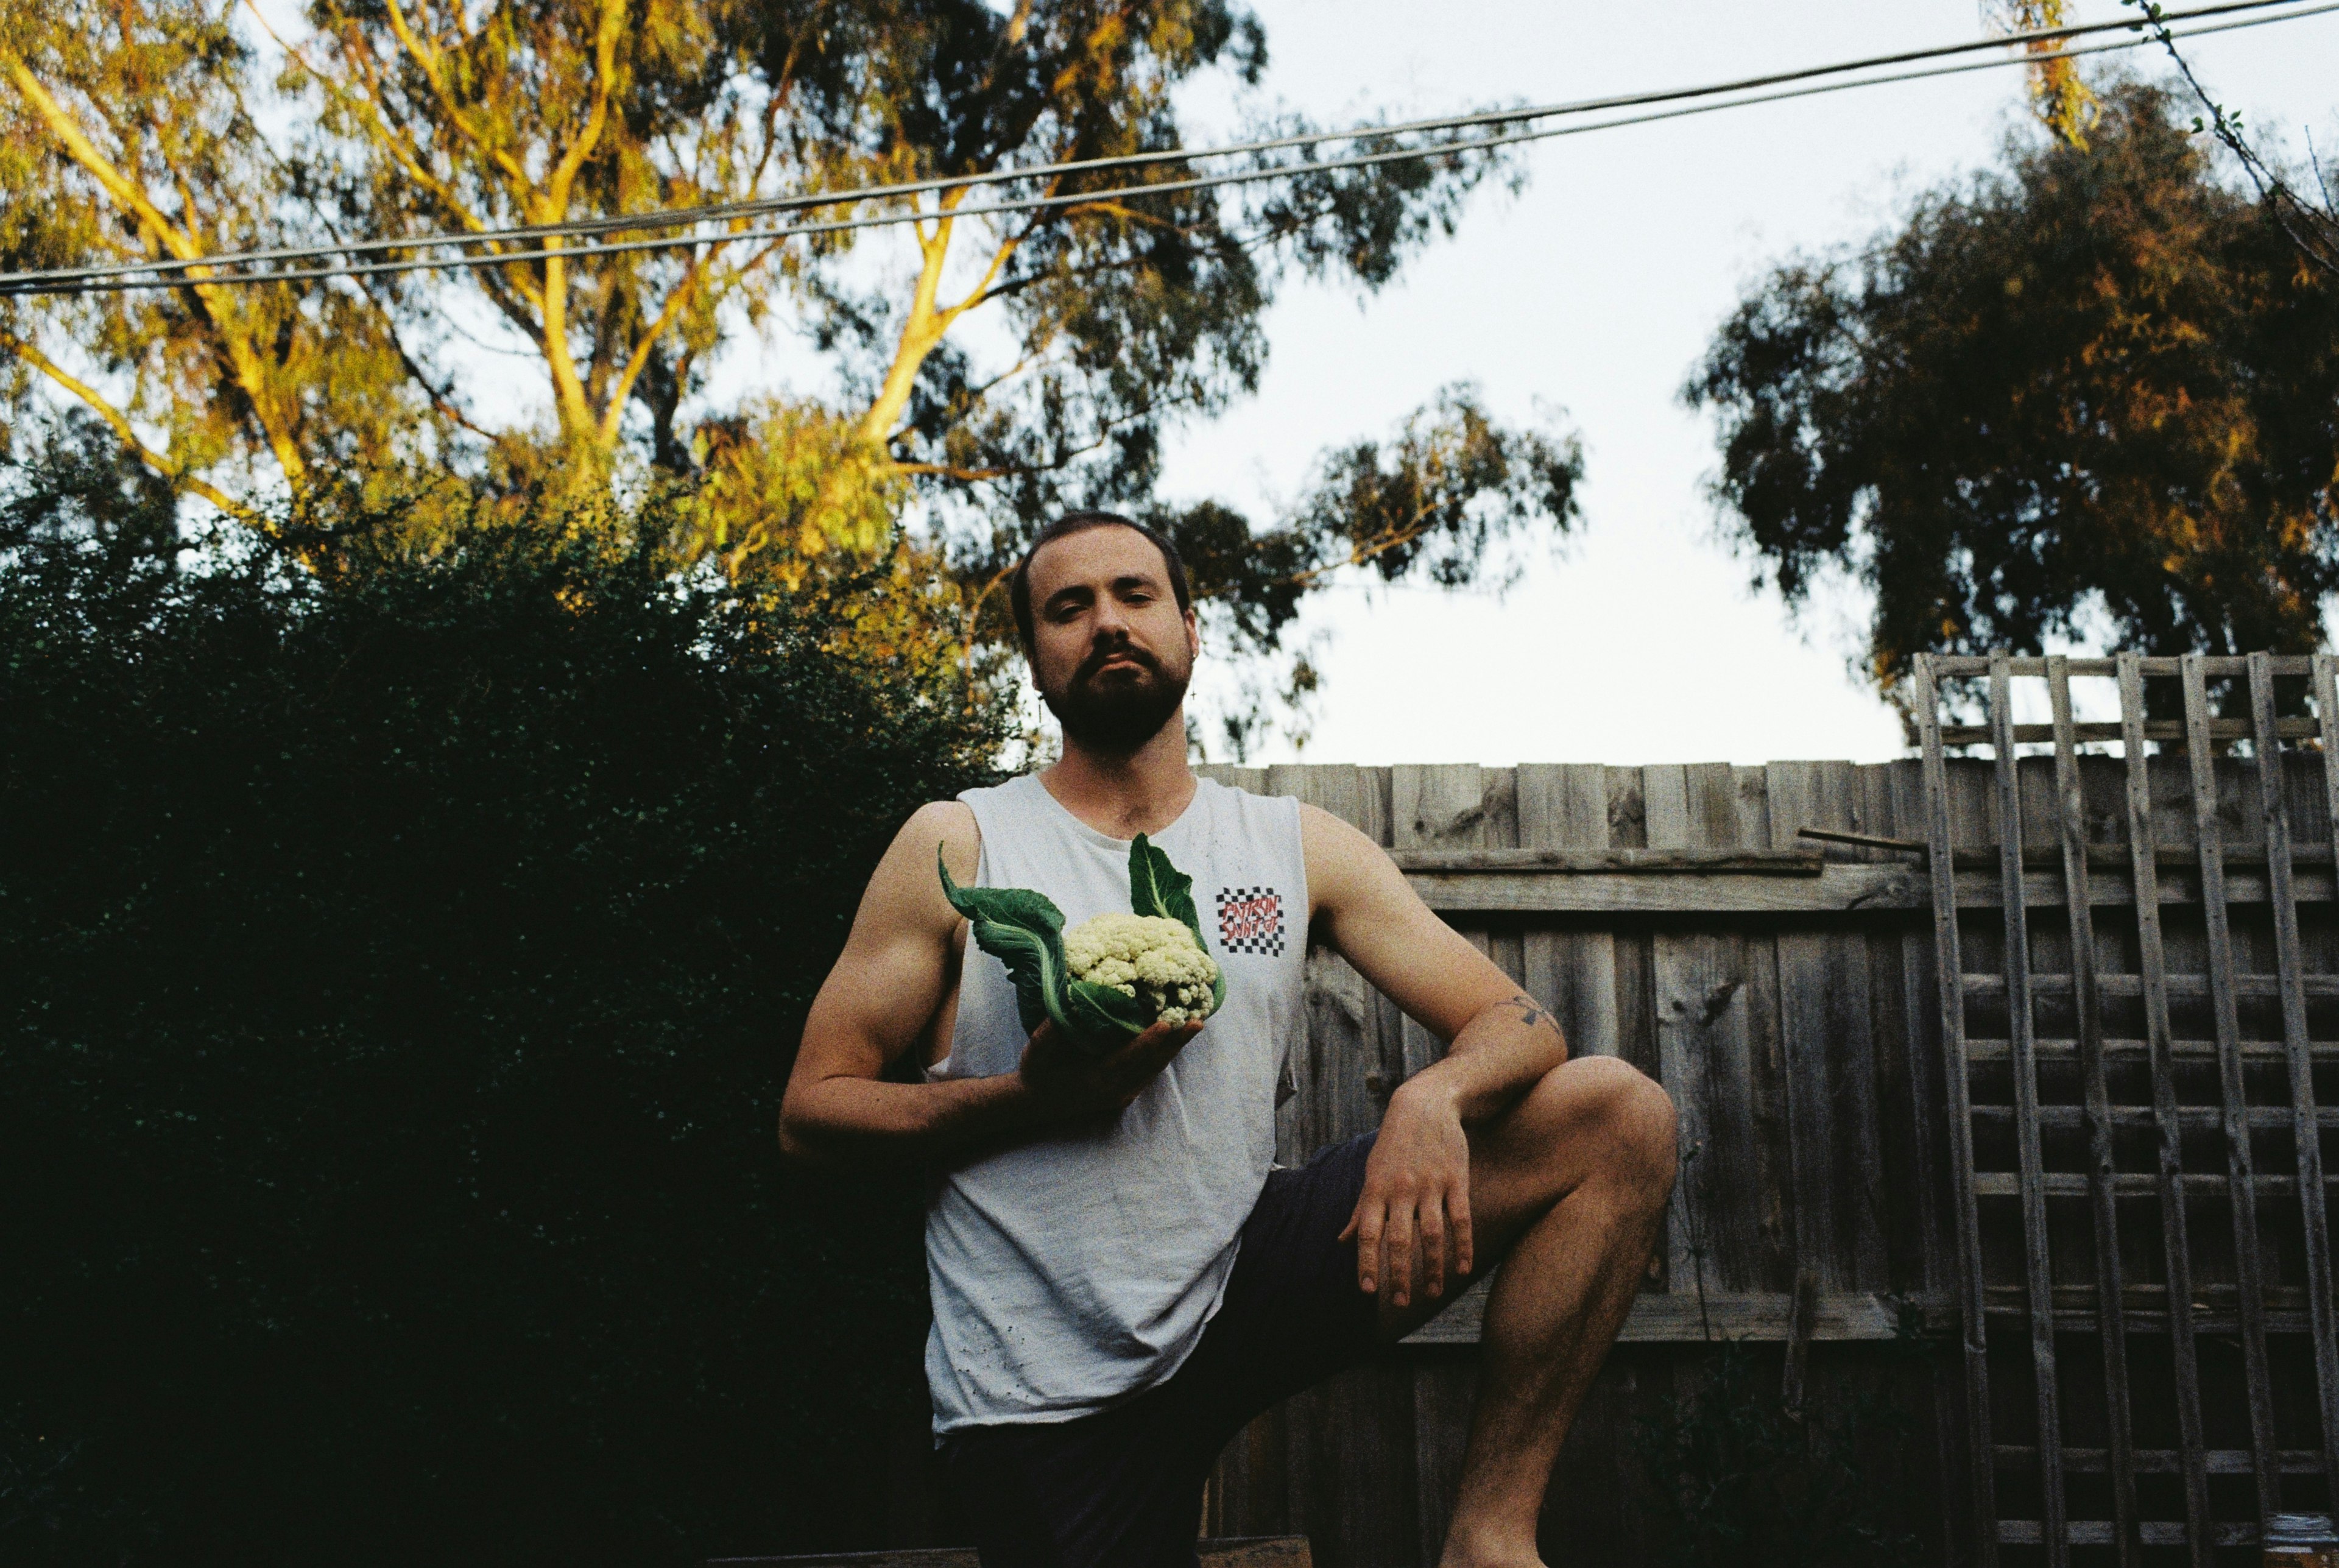 Ryan Prehn stands in a garden, in front of a fence. He wears a white sleeveless tee and hold a cauliflower as he looks at the camera. His arm is resting on his raised knee.